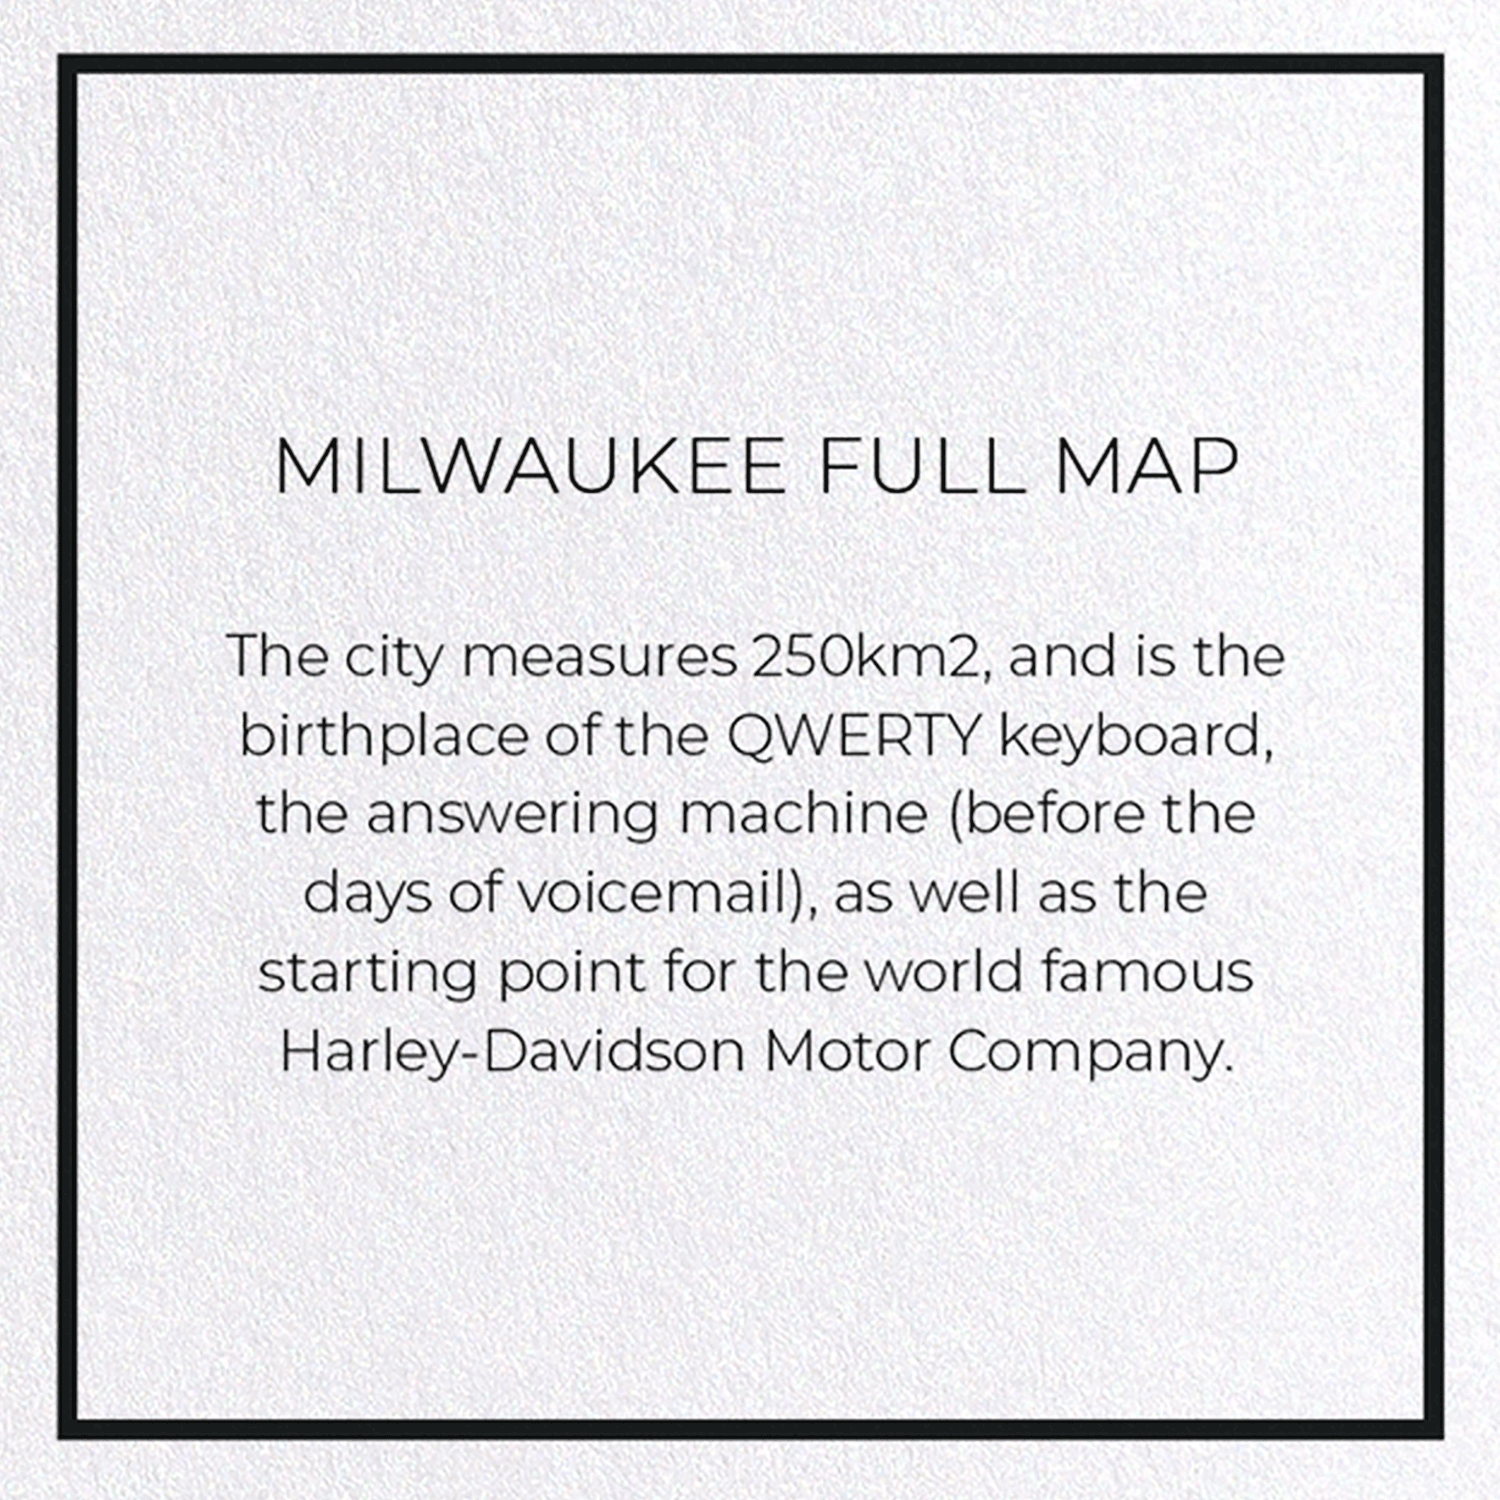 MILWAUKEE FULL MAP: 8xCards